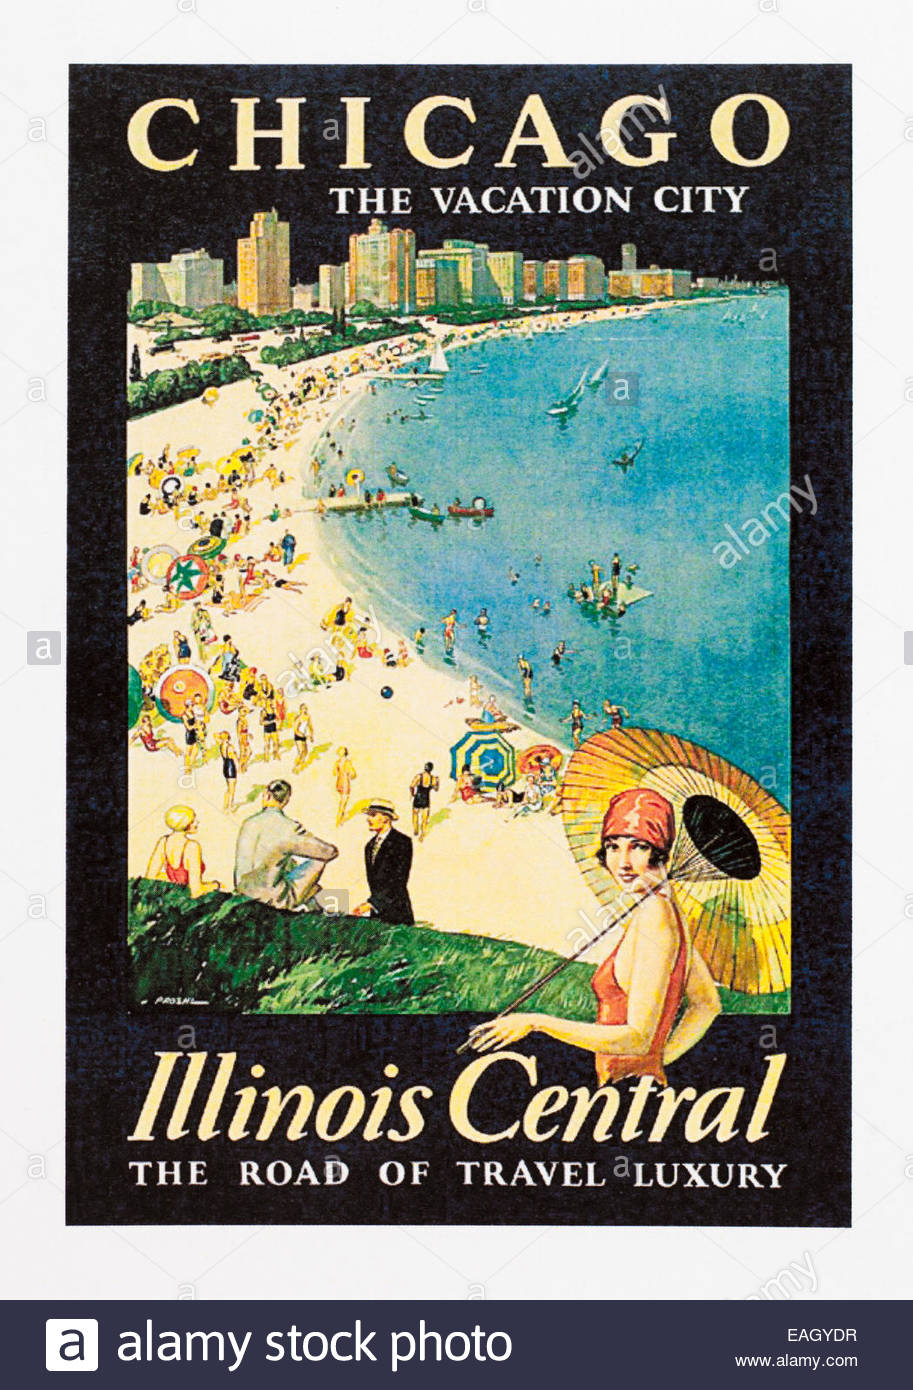 MAGNET Travel Poster Photo Magnet CHICAGO Vacation City Luxury Illinois Central